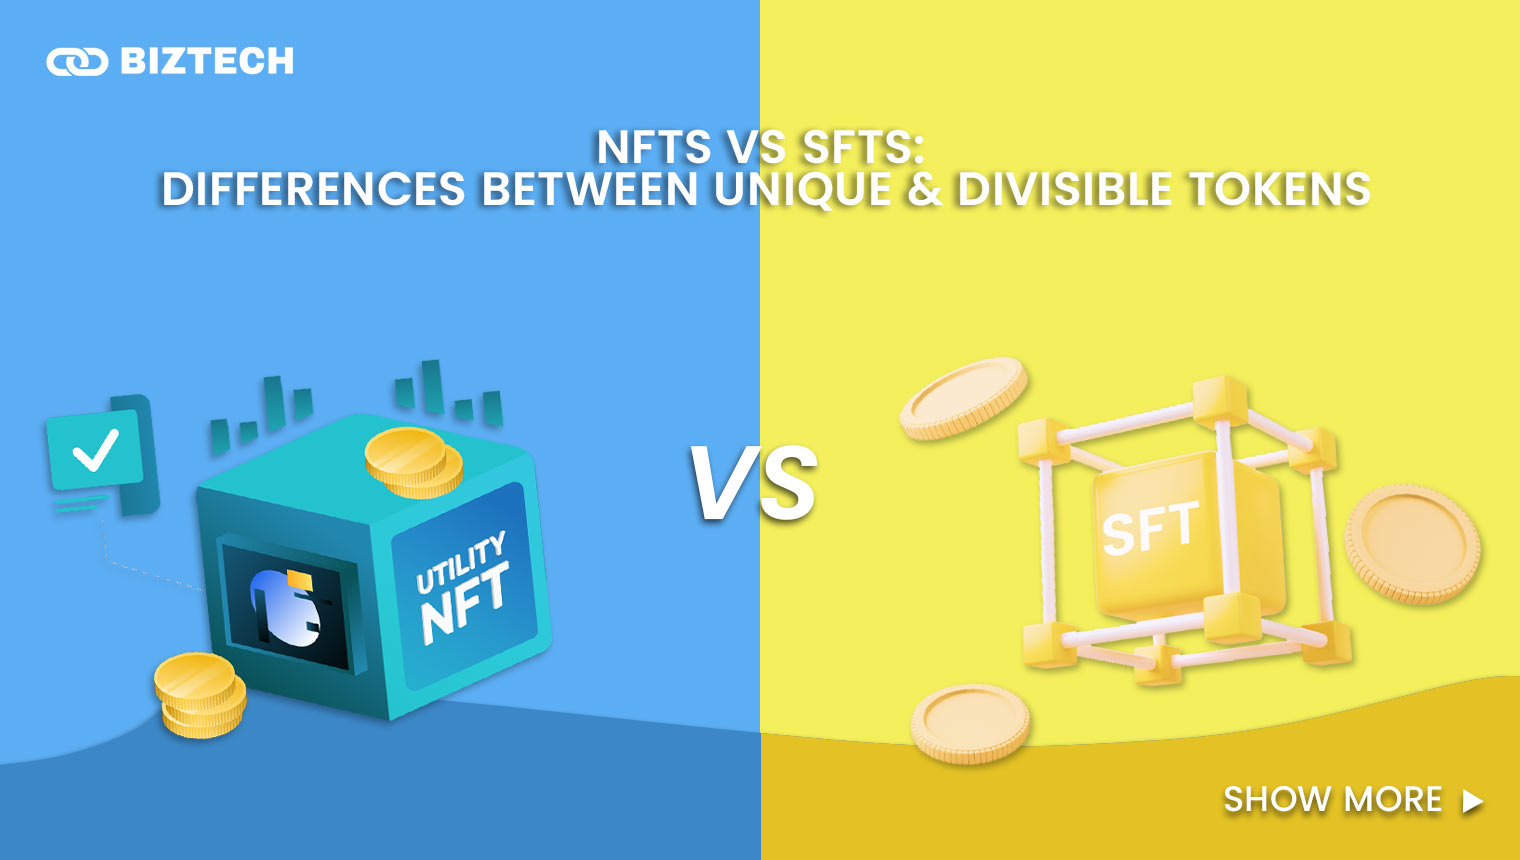 NFT vs SFT: What Are They and What Are The Differences